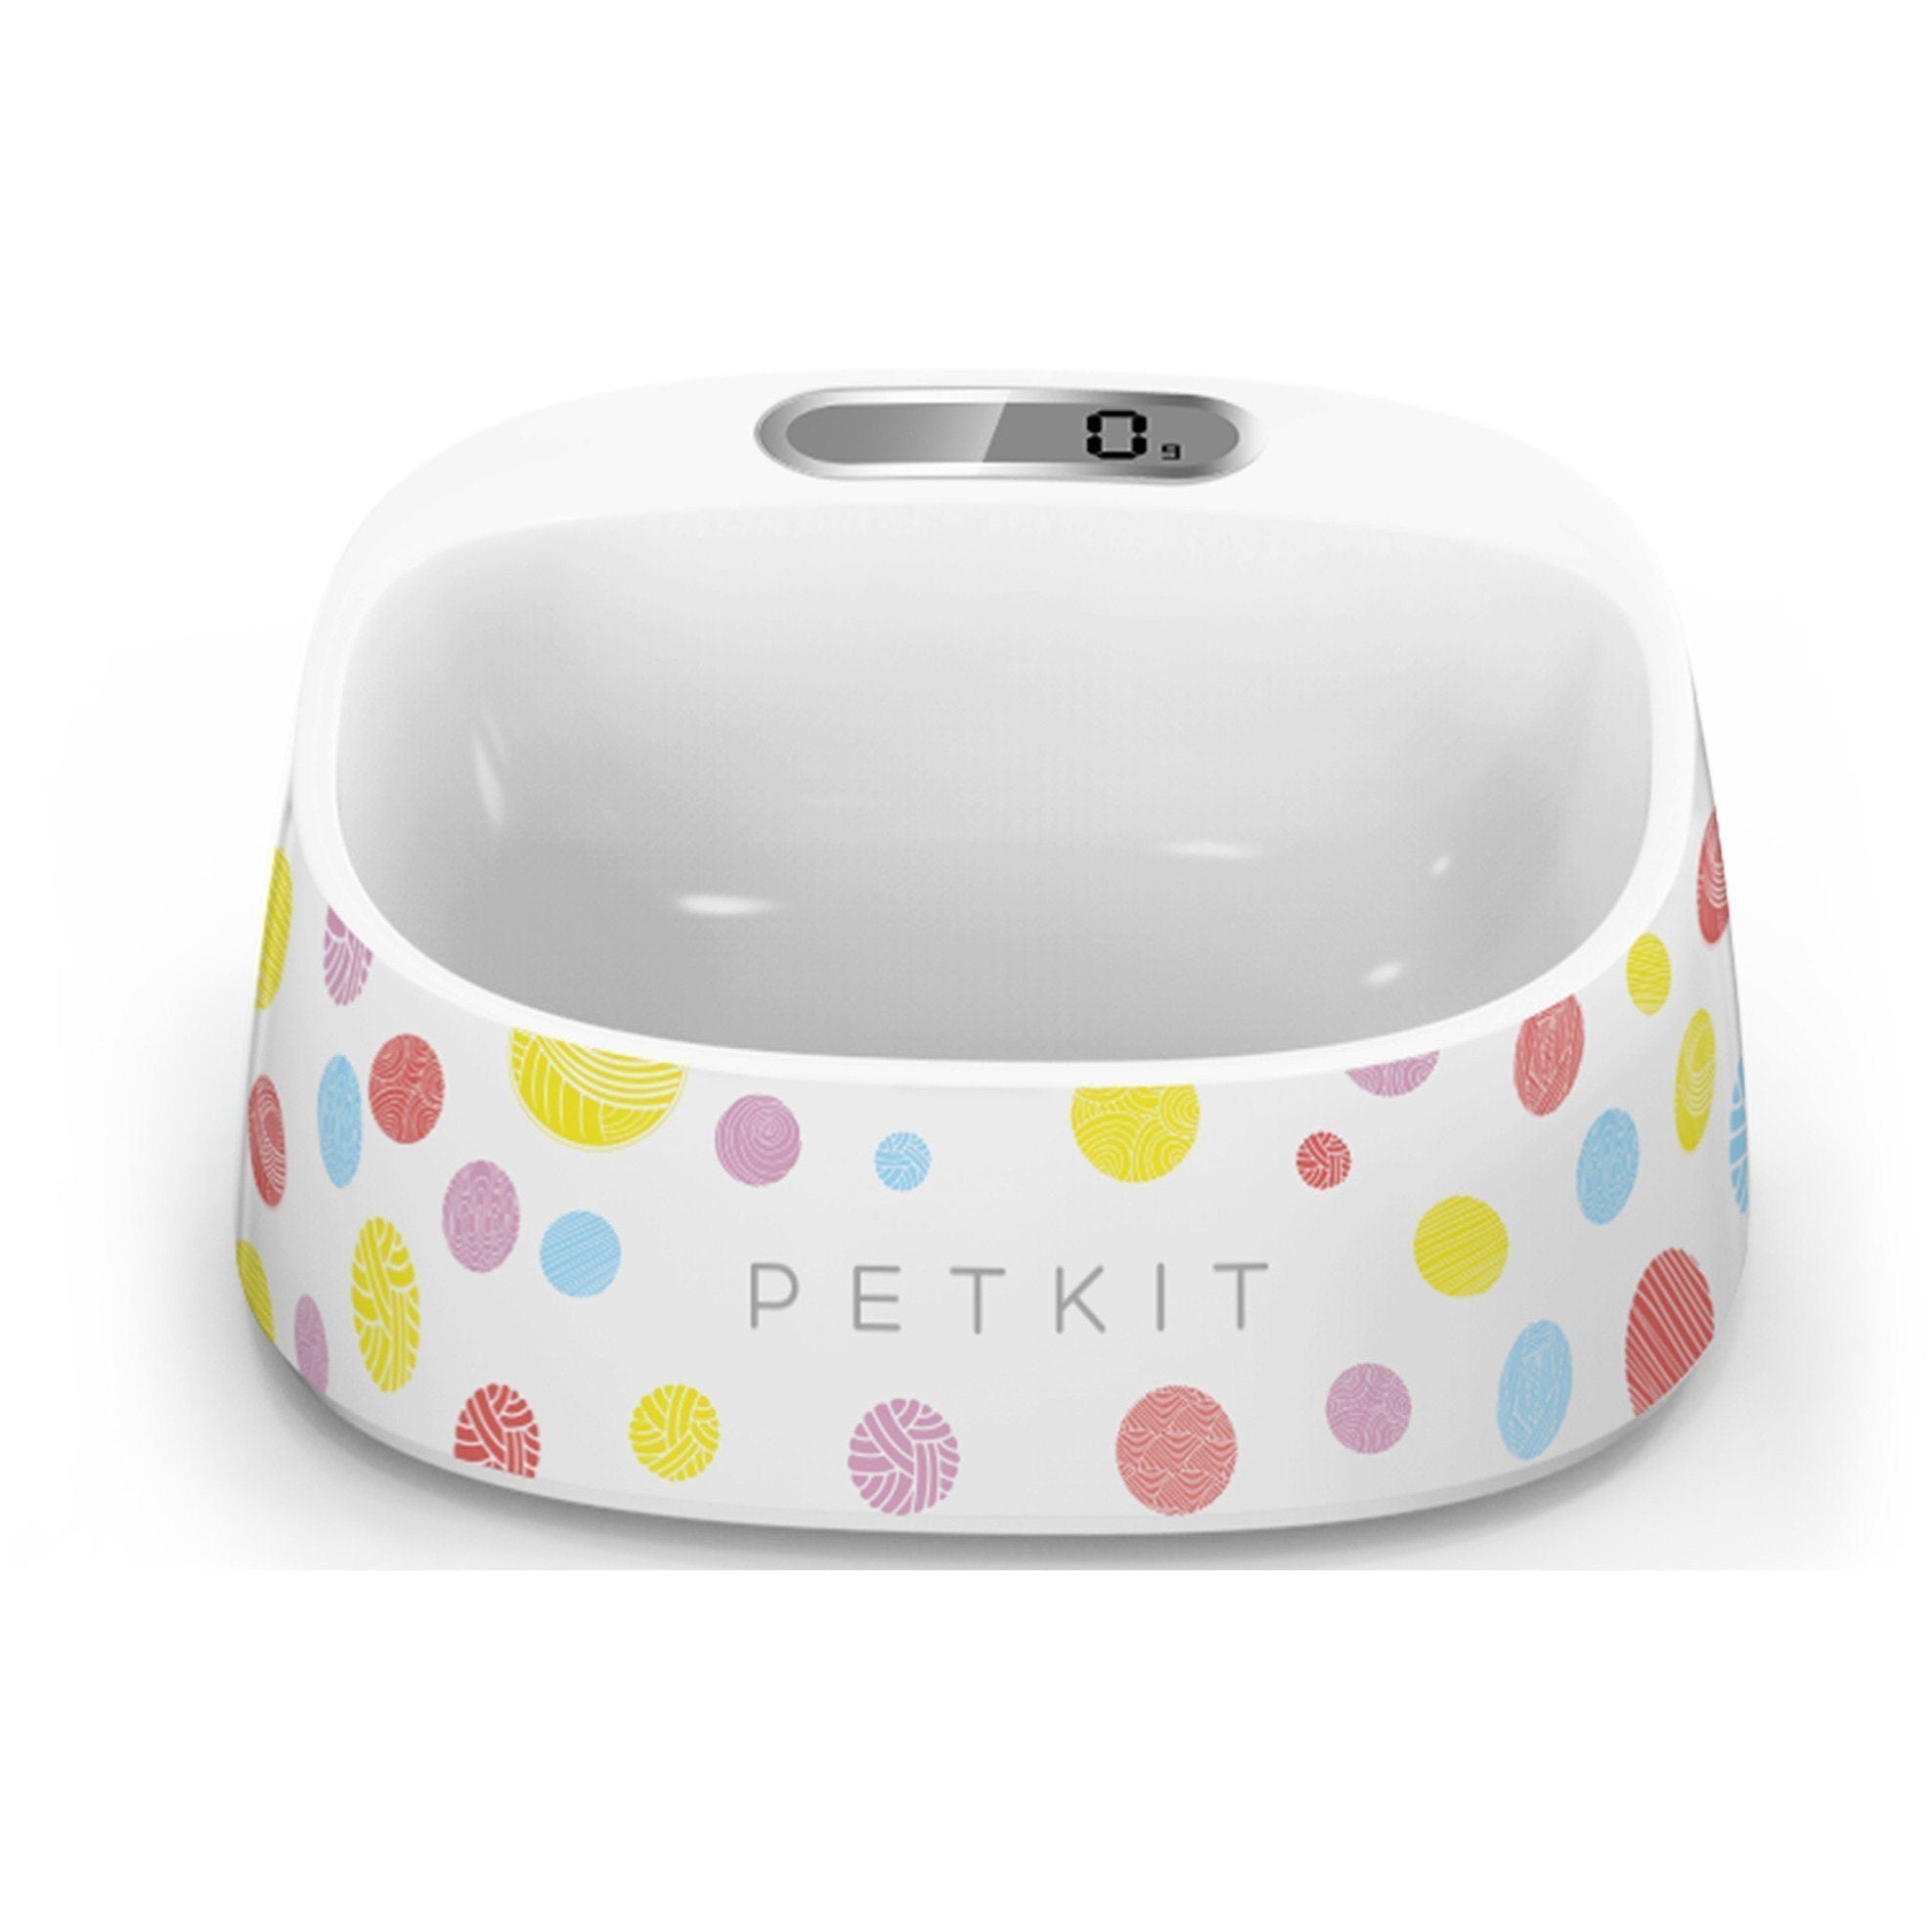 PETKIT ® 'FRESH' Anti-Bacterial Waterproof Smart Food Weight Calculating Digital Scale Pet Cat Dog Bowl Feeder w/ Inlcuded Batteries Rainbow Dotted 